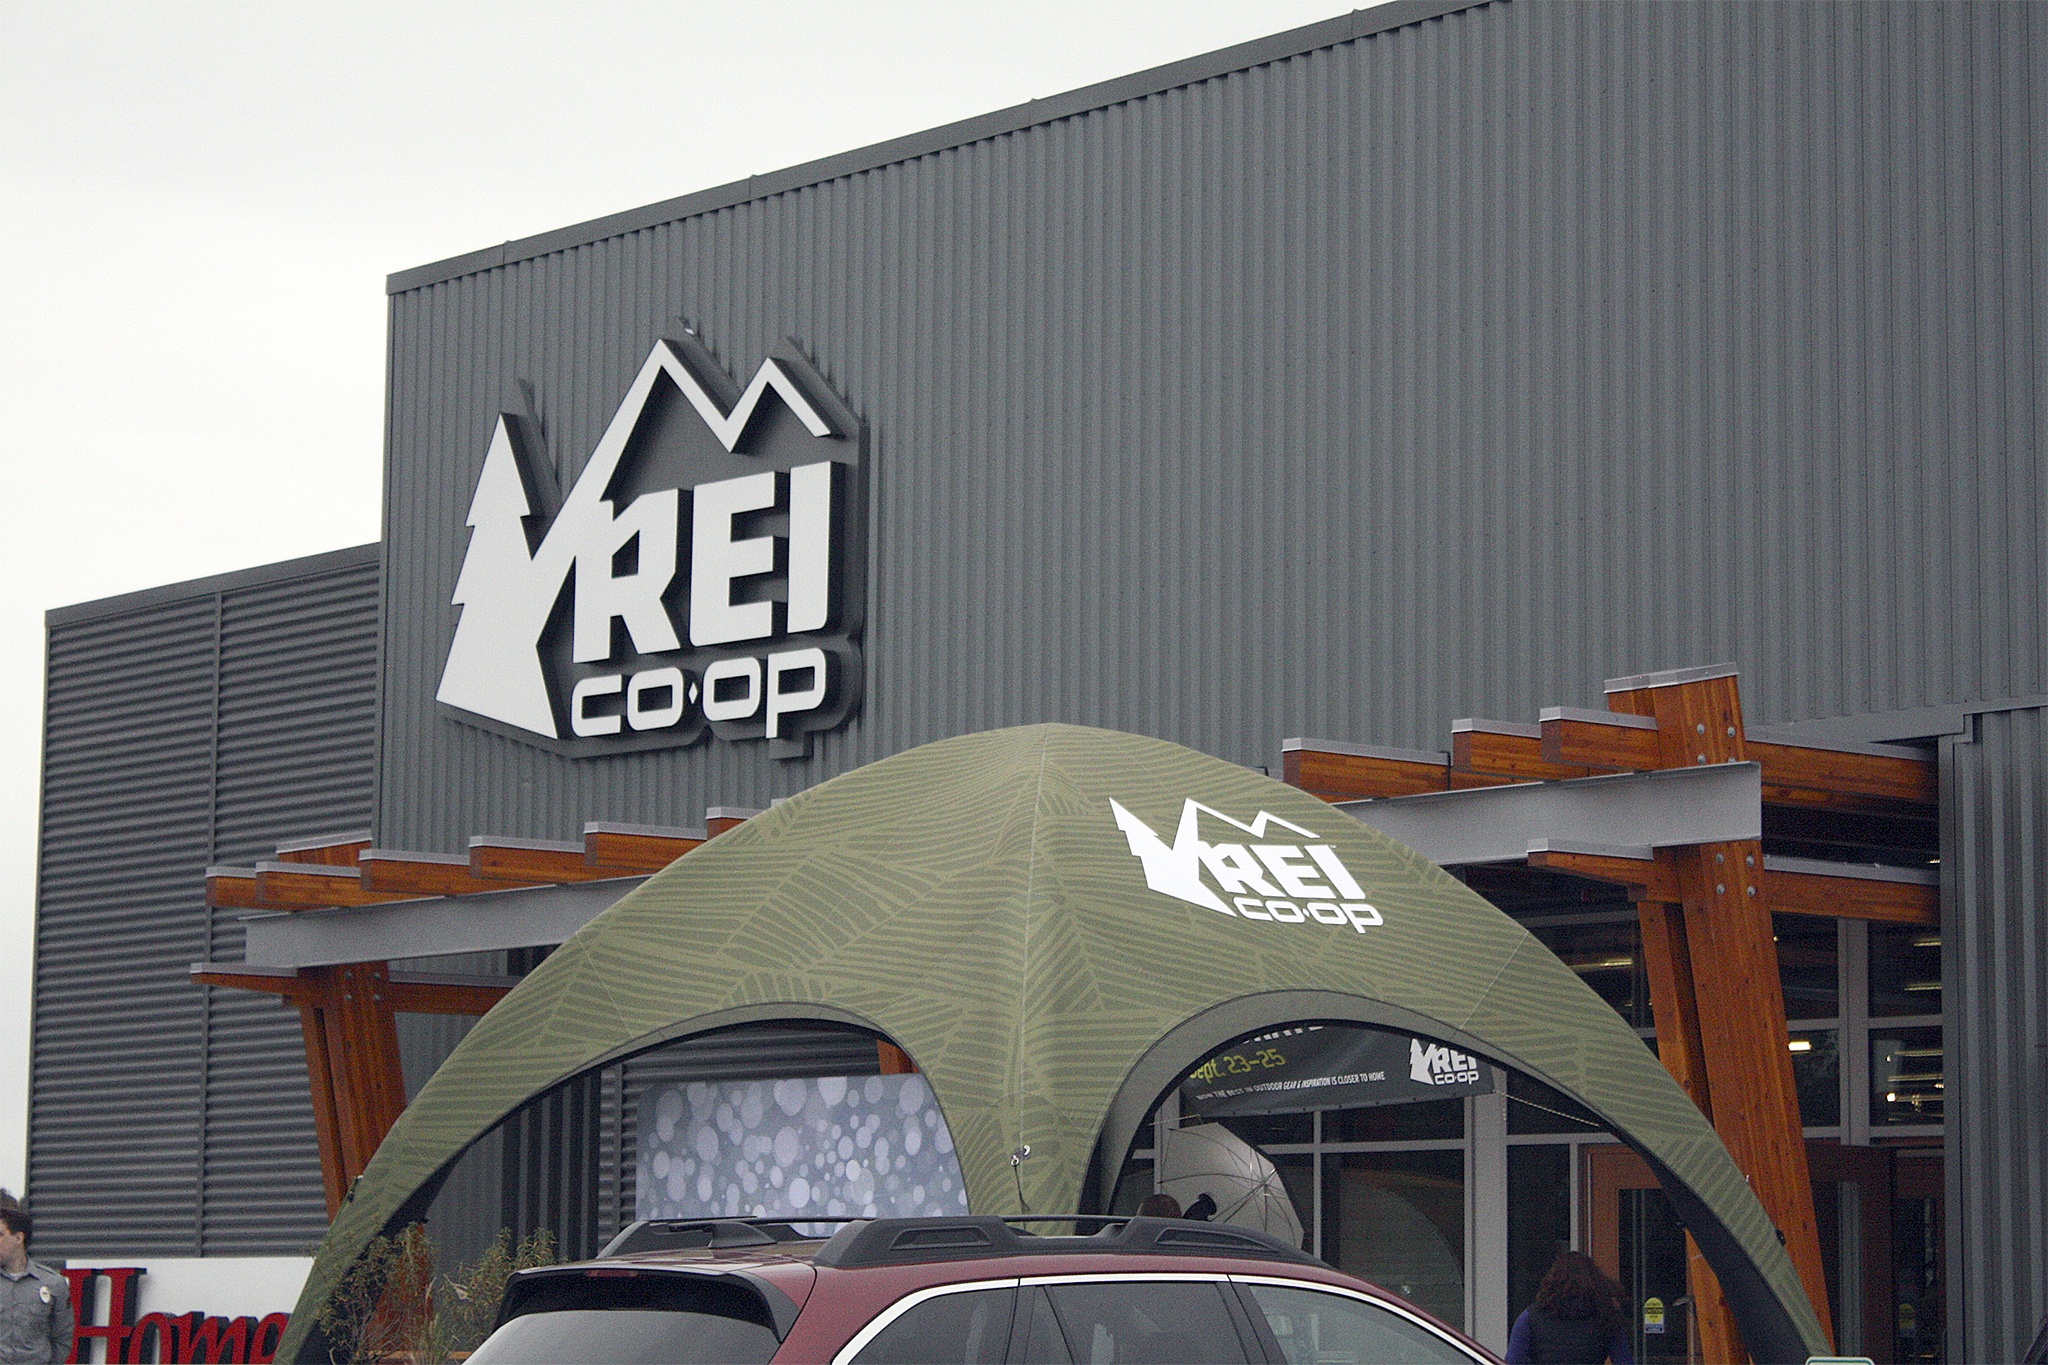 REi opened its new Bellevue location Sept. 23. The corporation just confirmed it will also be moving its headquarters to Bellevue